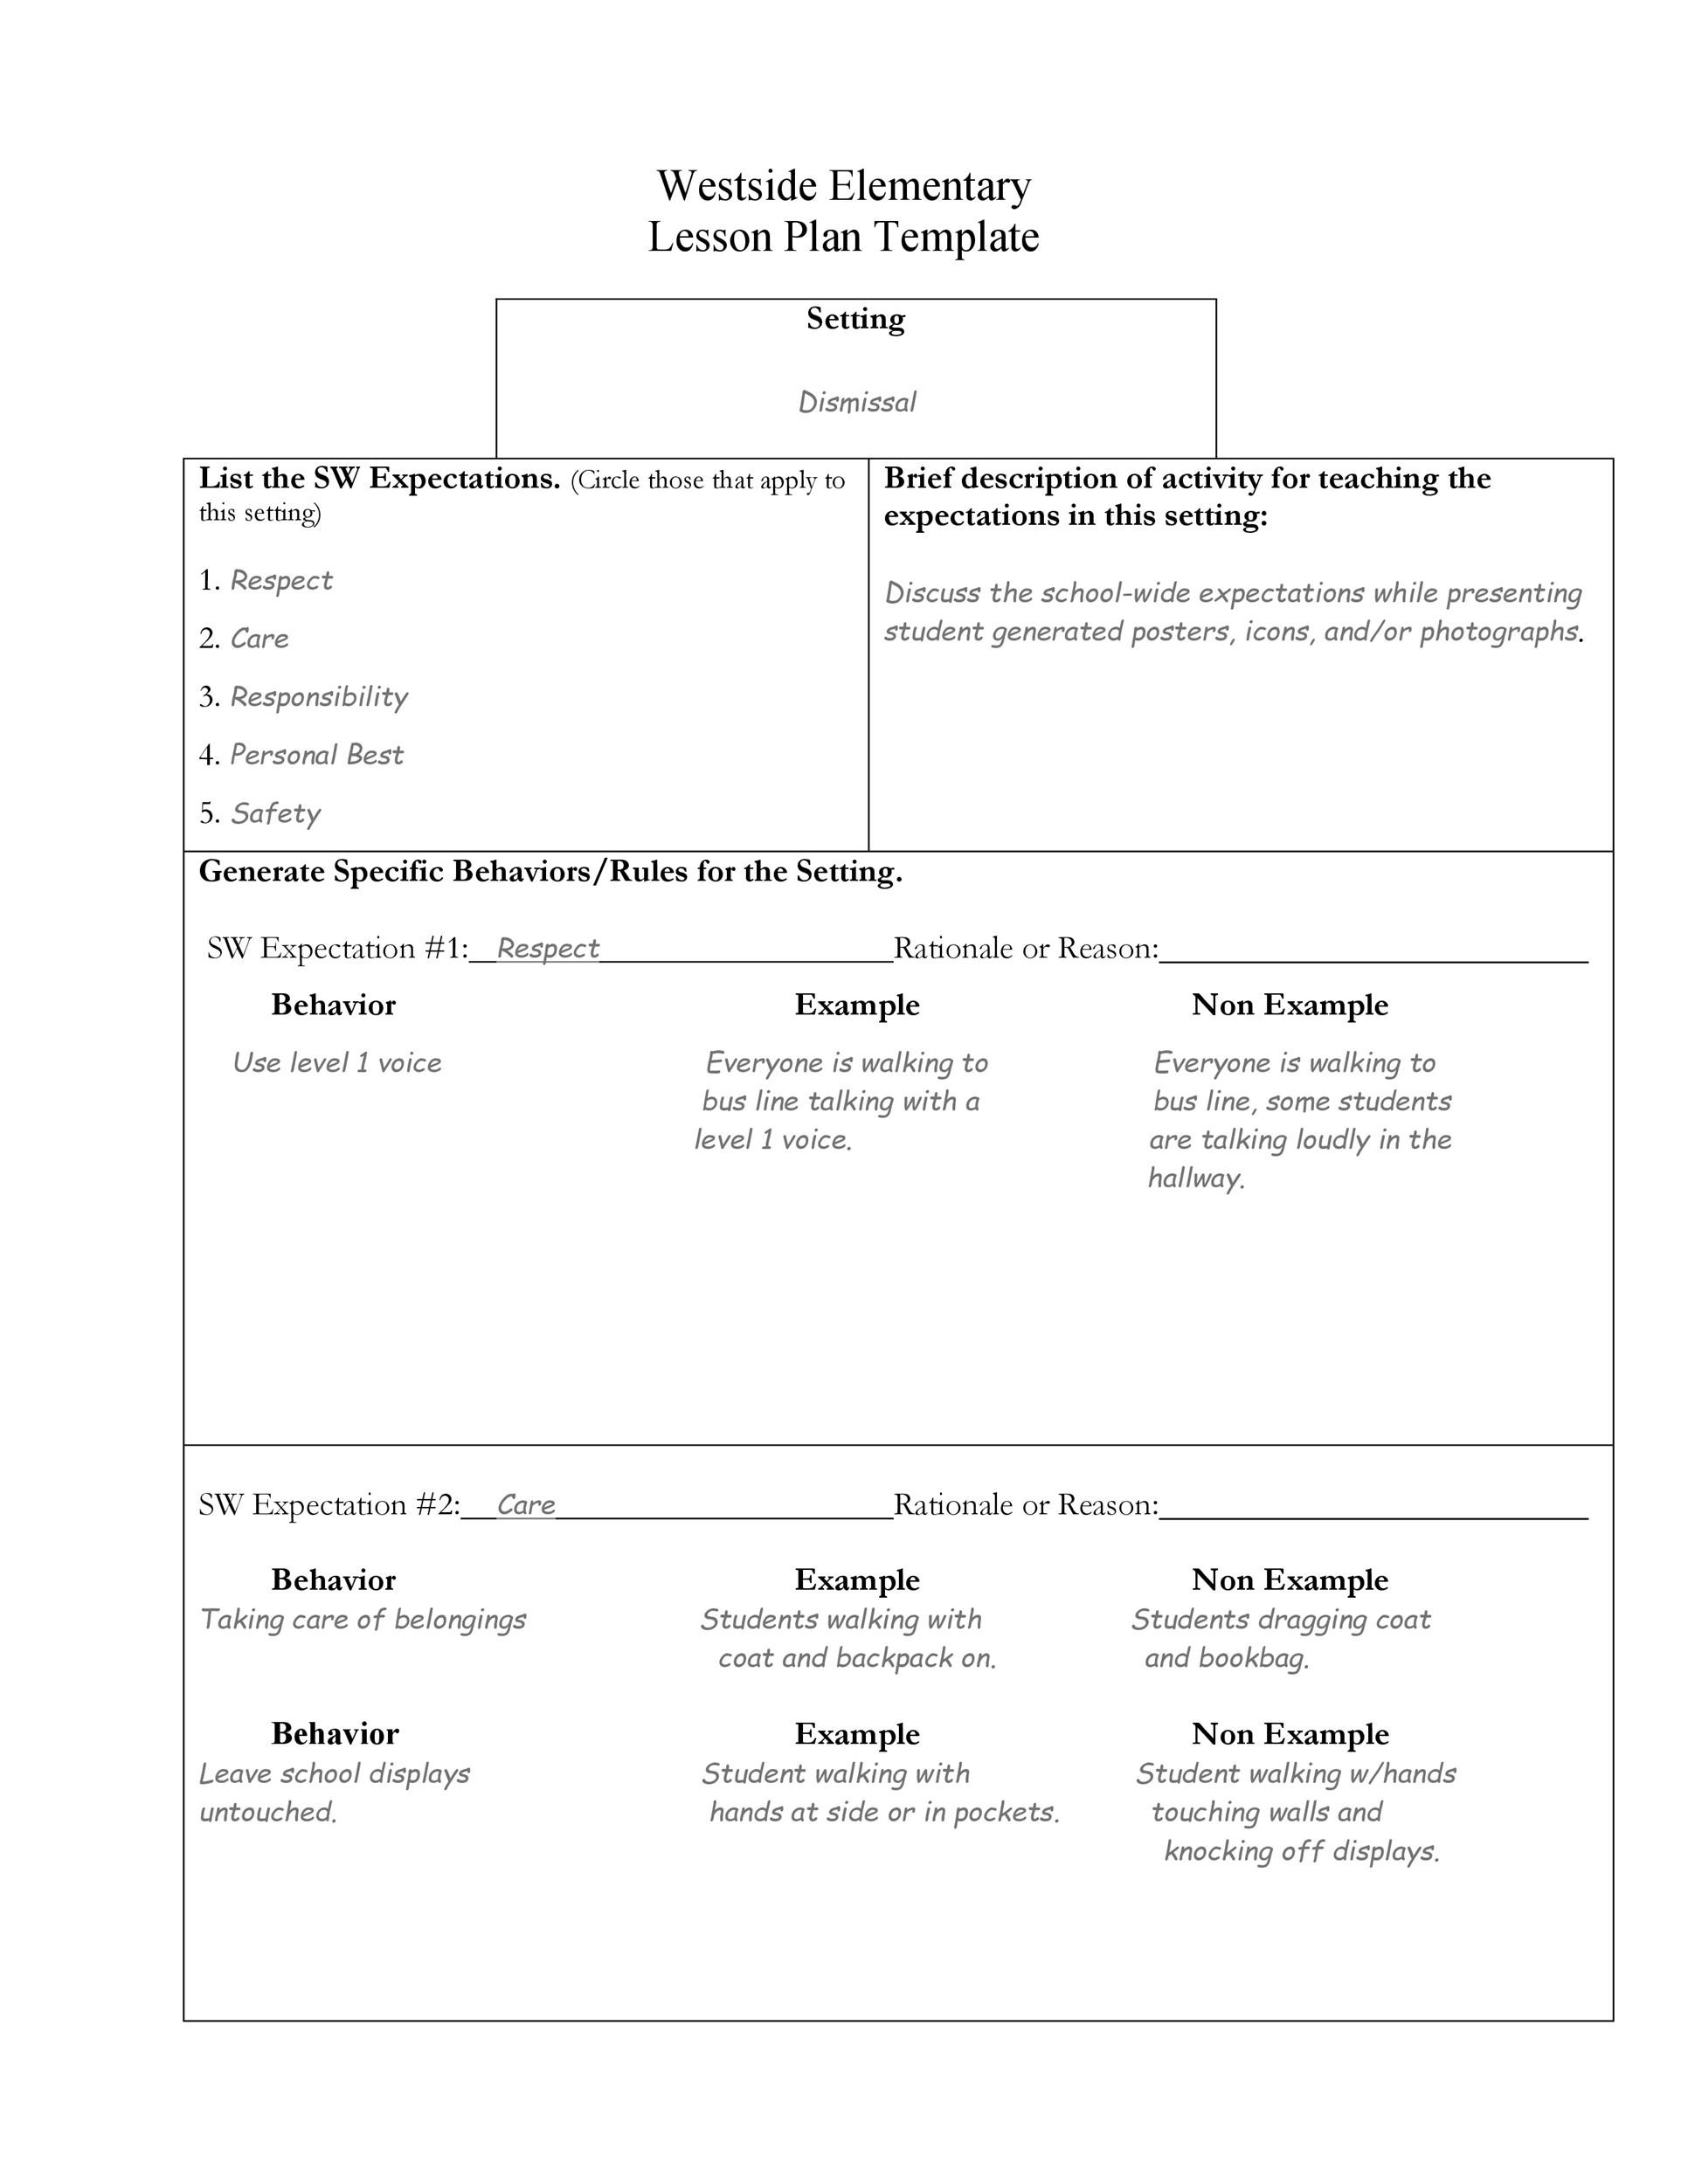 Free lesson plan template 42